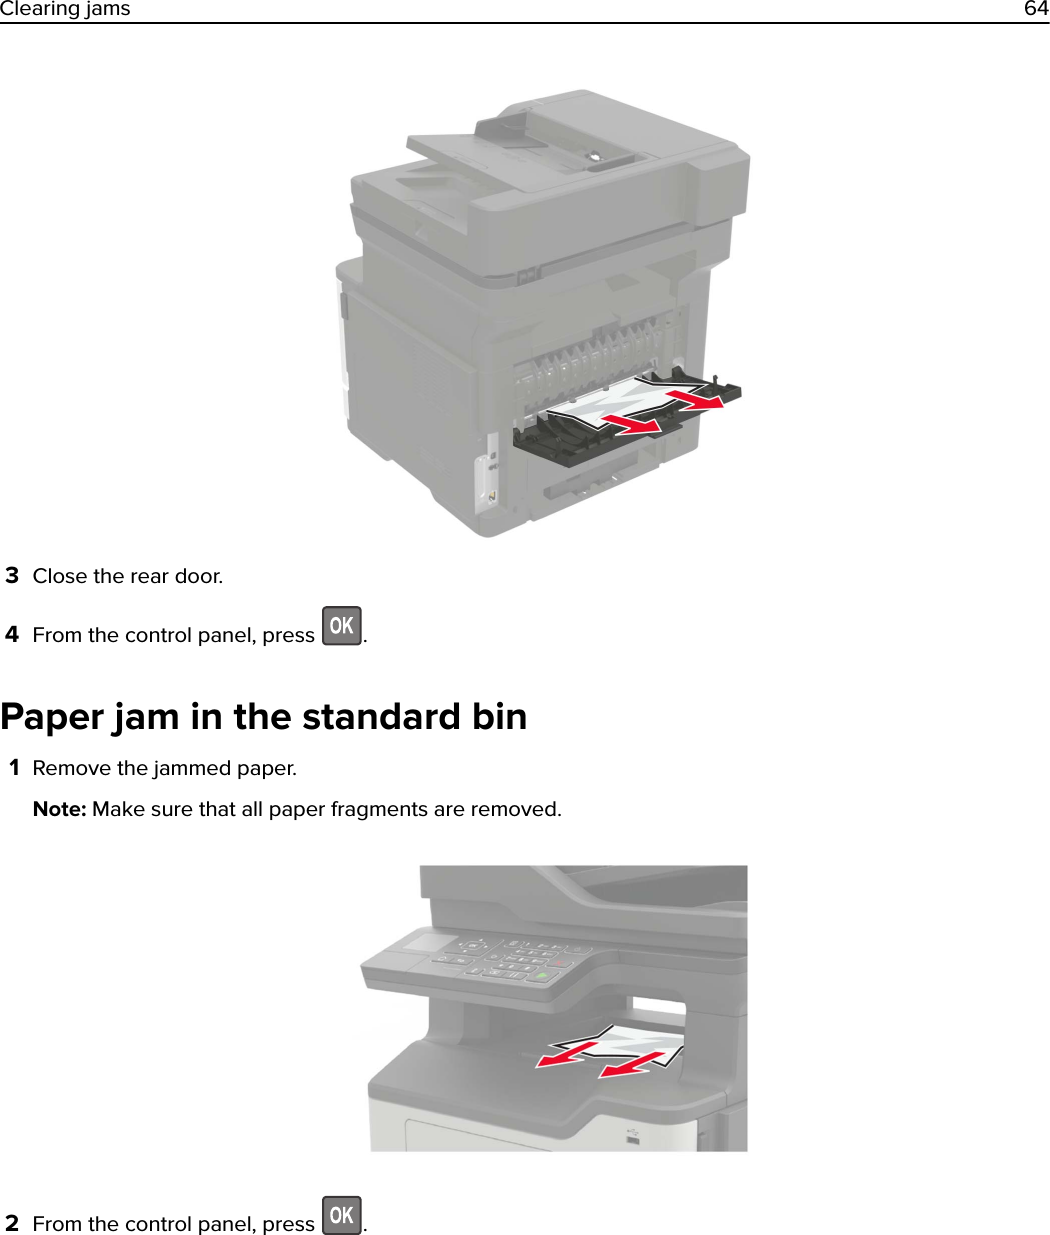 3Close the rear door.4From the control panel, press  .Paper jam in the standard bin1Remove the jammed paper.Note: Make sure that all paper fragments are removed.2From the control panel, press  .Clearing jams 64